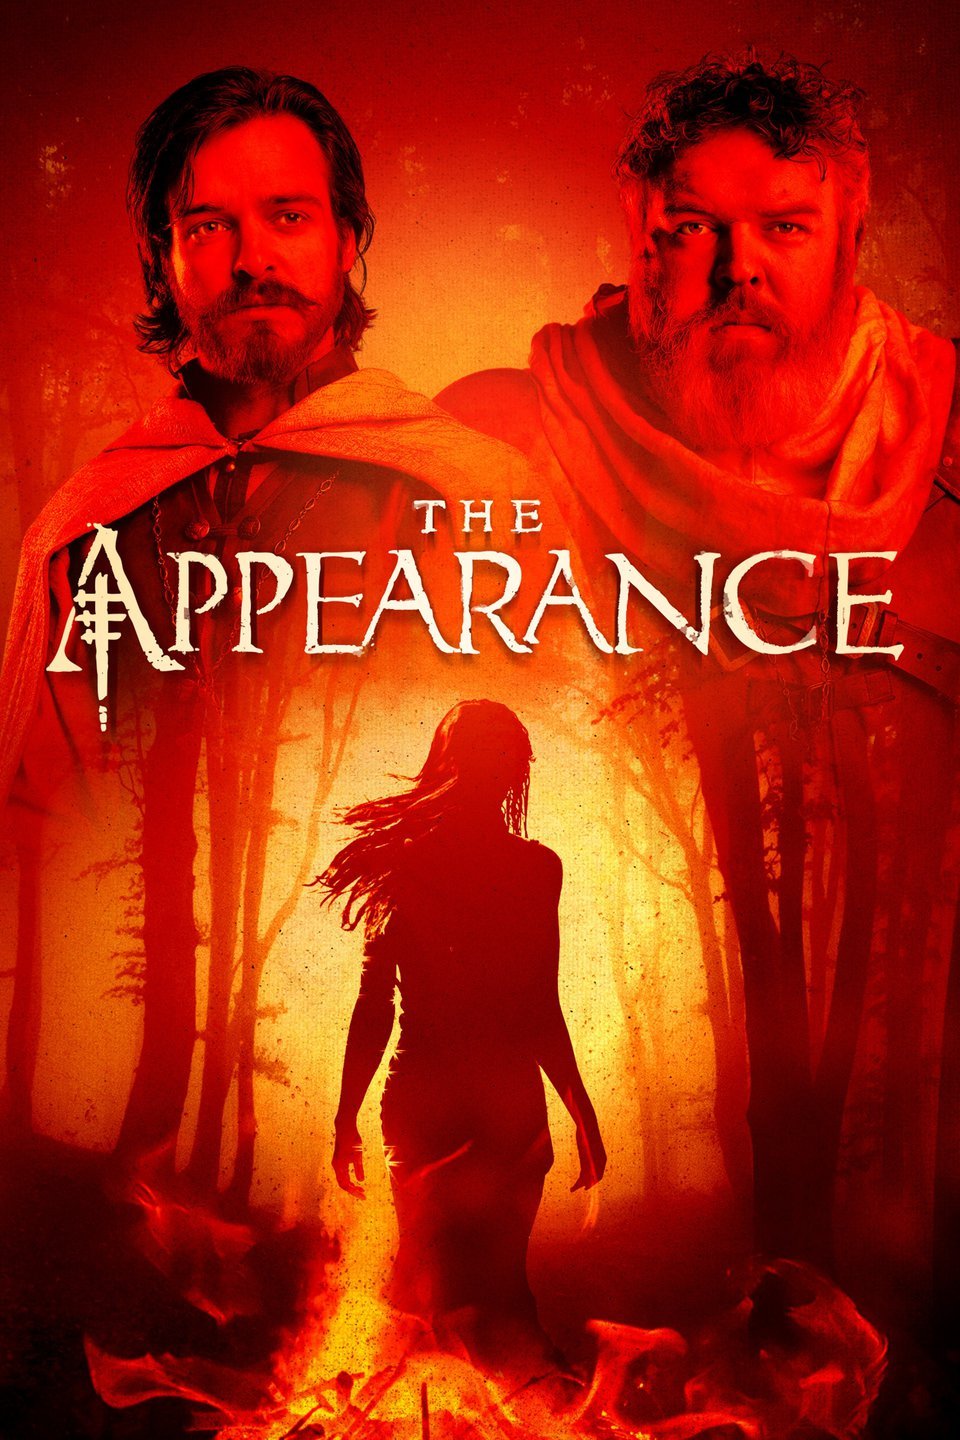 &amp;#208;&nbsp;&amp;#208;&amp;#208;&amp;#209;&amp;#131;&amp;#208;&amp;#209;&amp;#130;&amp;#208;&amp;#209;&amp;#130; &amp;#209;&amp;#129;&amp;#208;&amp;#190; &amp;#209;&amp;#129;&amp;#208;&amp;#208;&amp;#184;&amp;#208;&amp;#186;&amp;#208; &amp;#208;&amp;#208; The Appearance (2018)